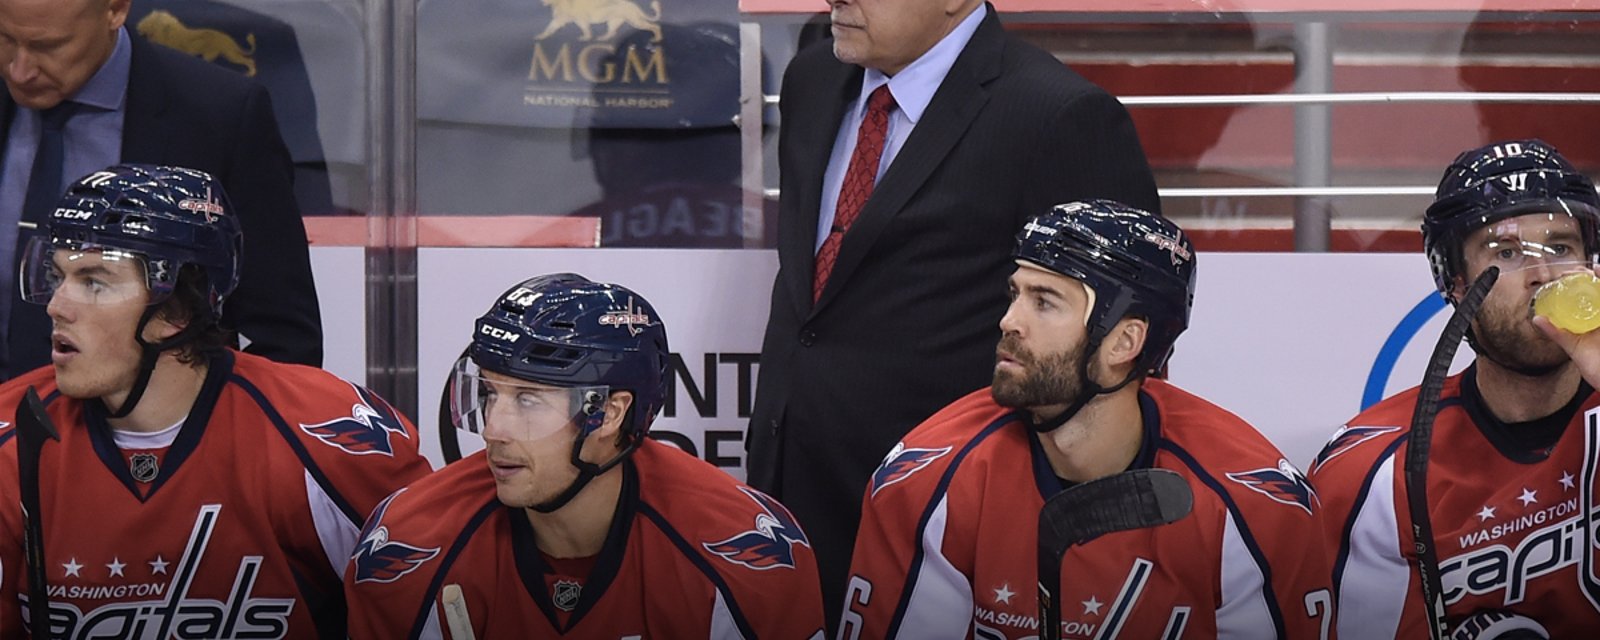 Breaking: Trotz makes a surprising lineup decision, scratches promising young player